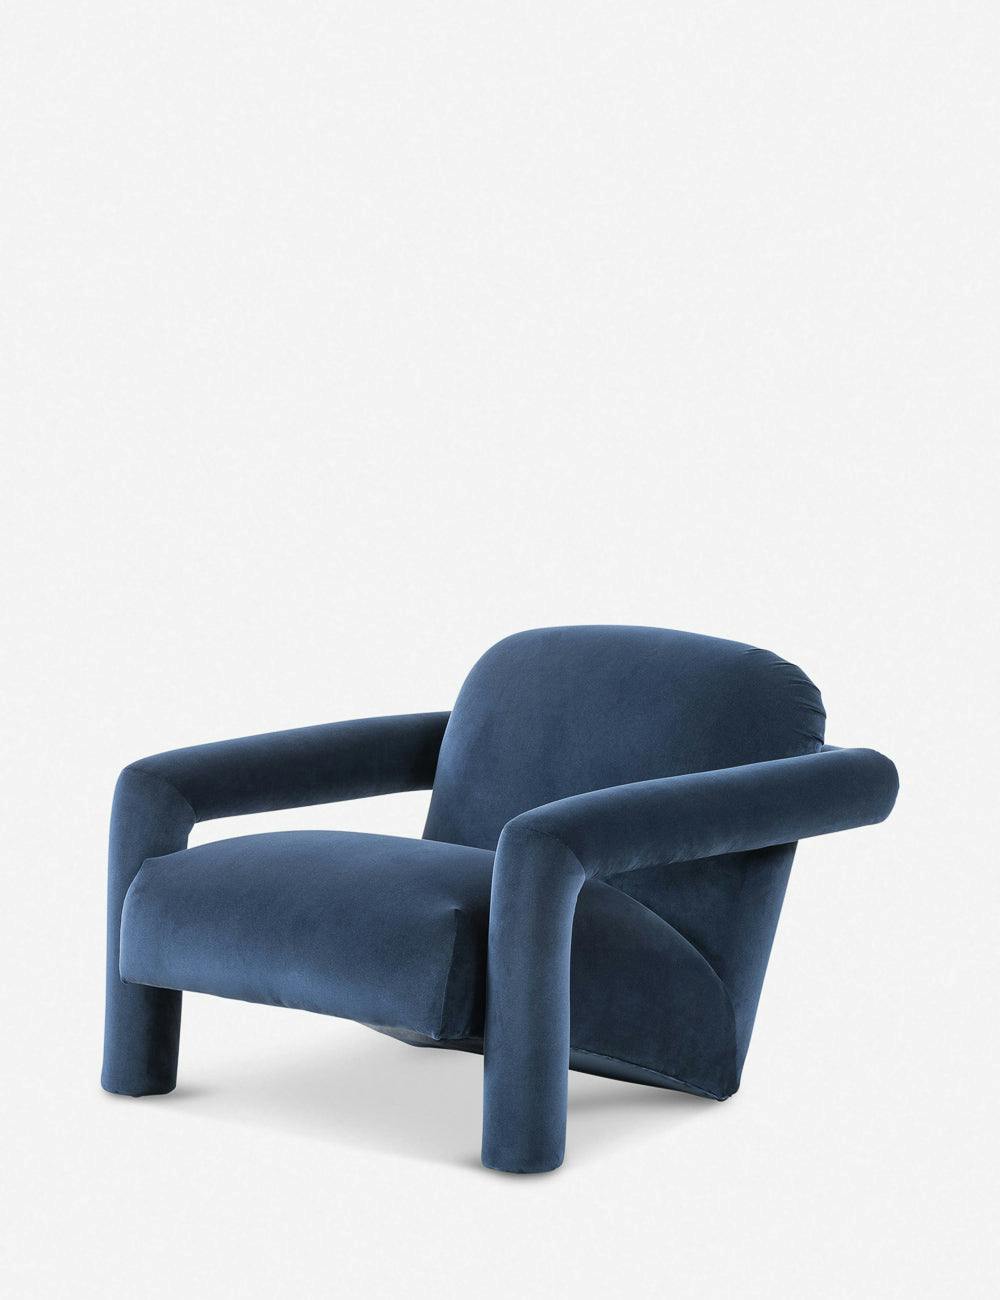 Fillmore Sapphire Navy Accent Chair